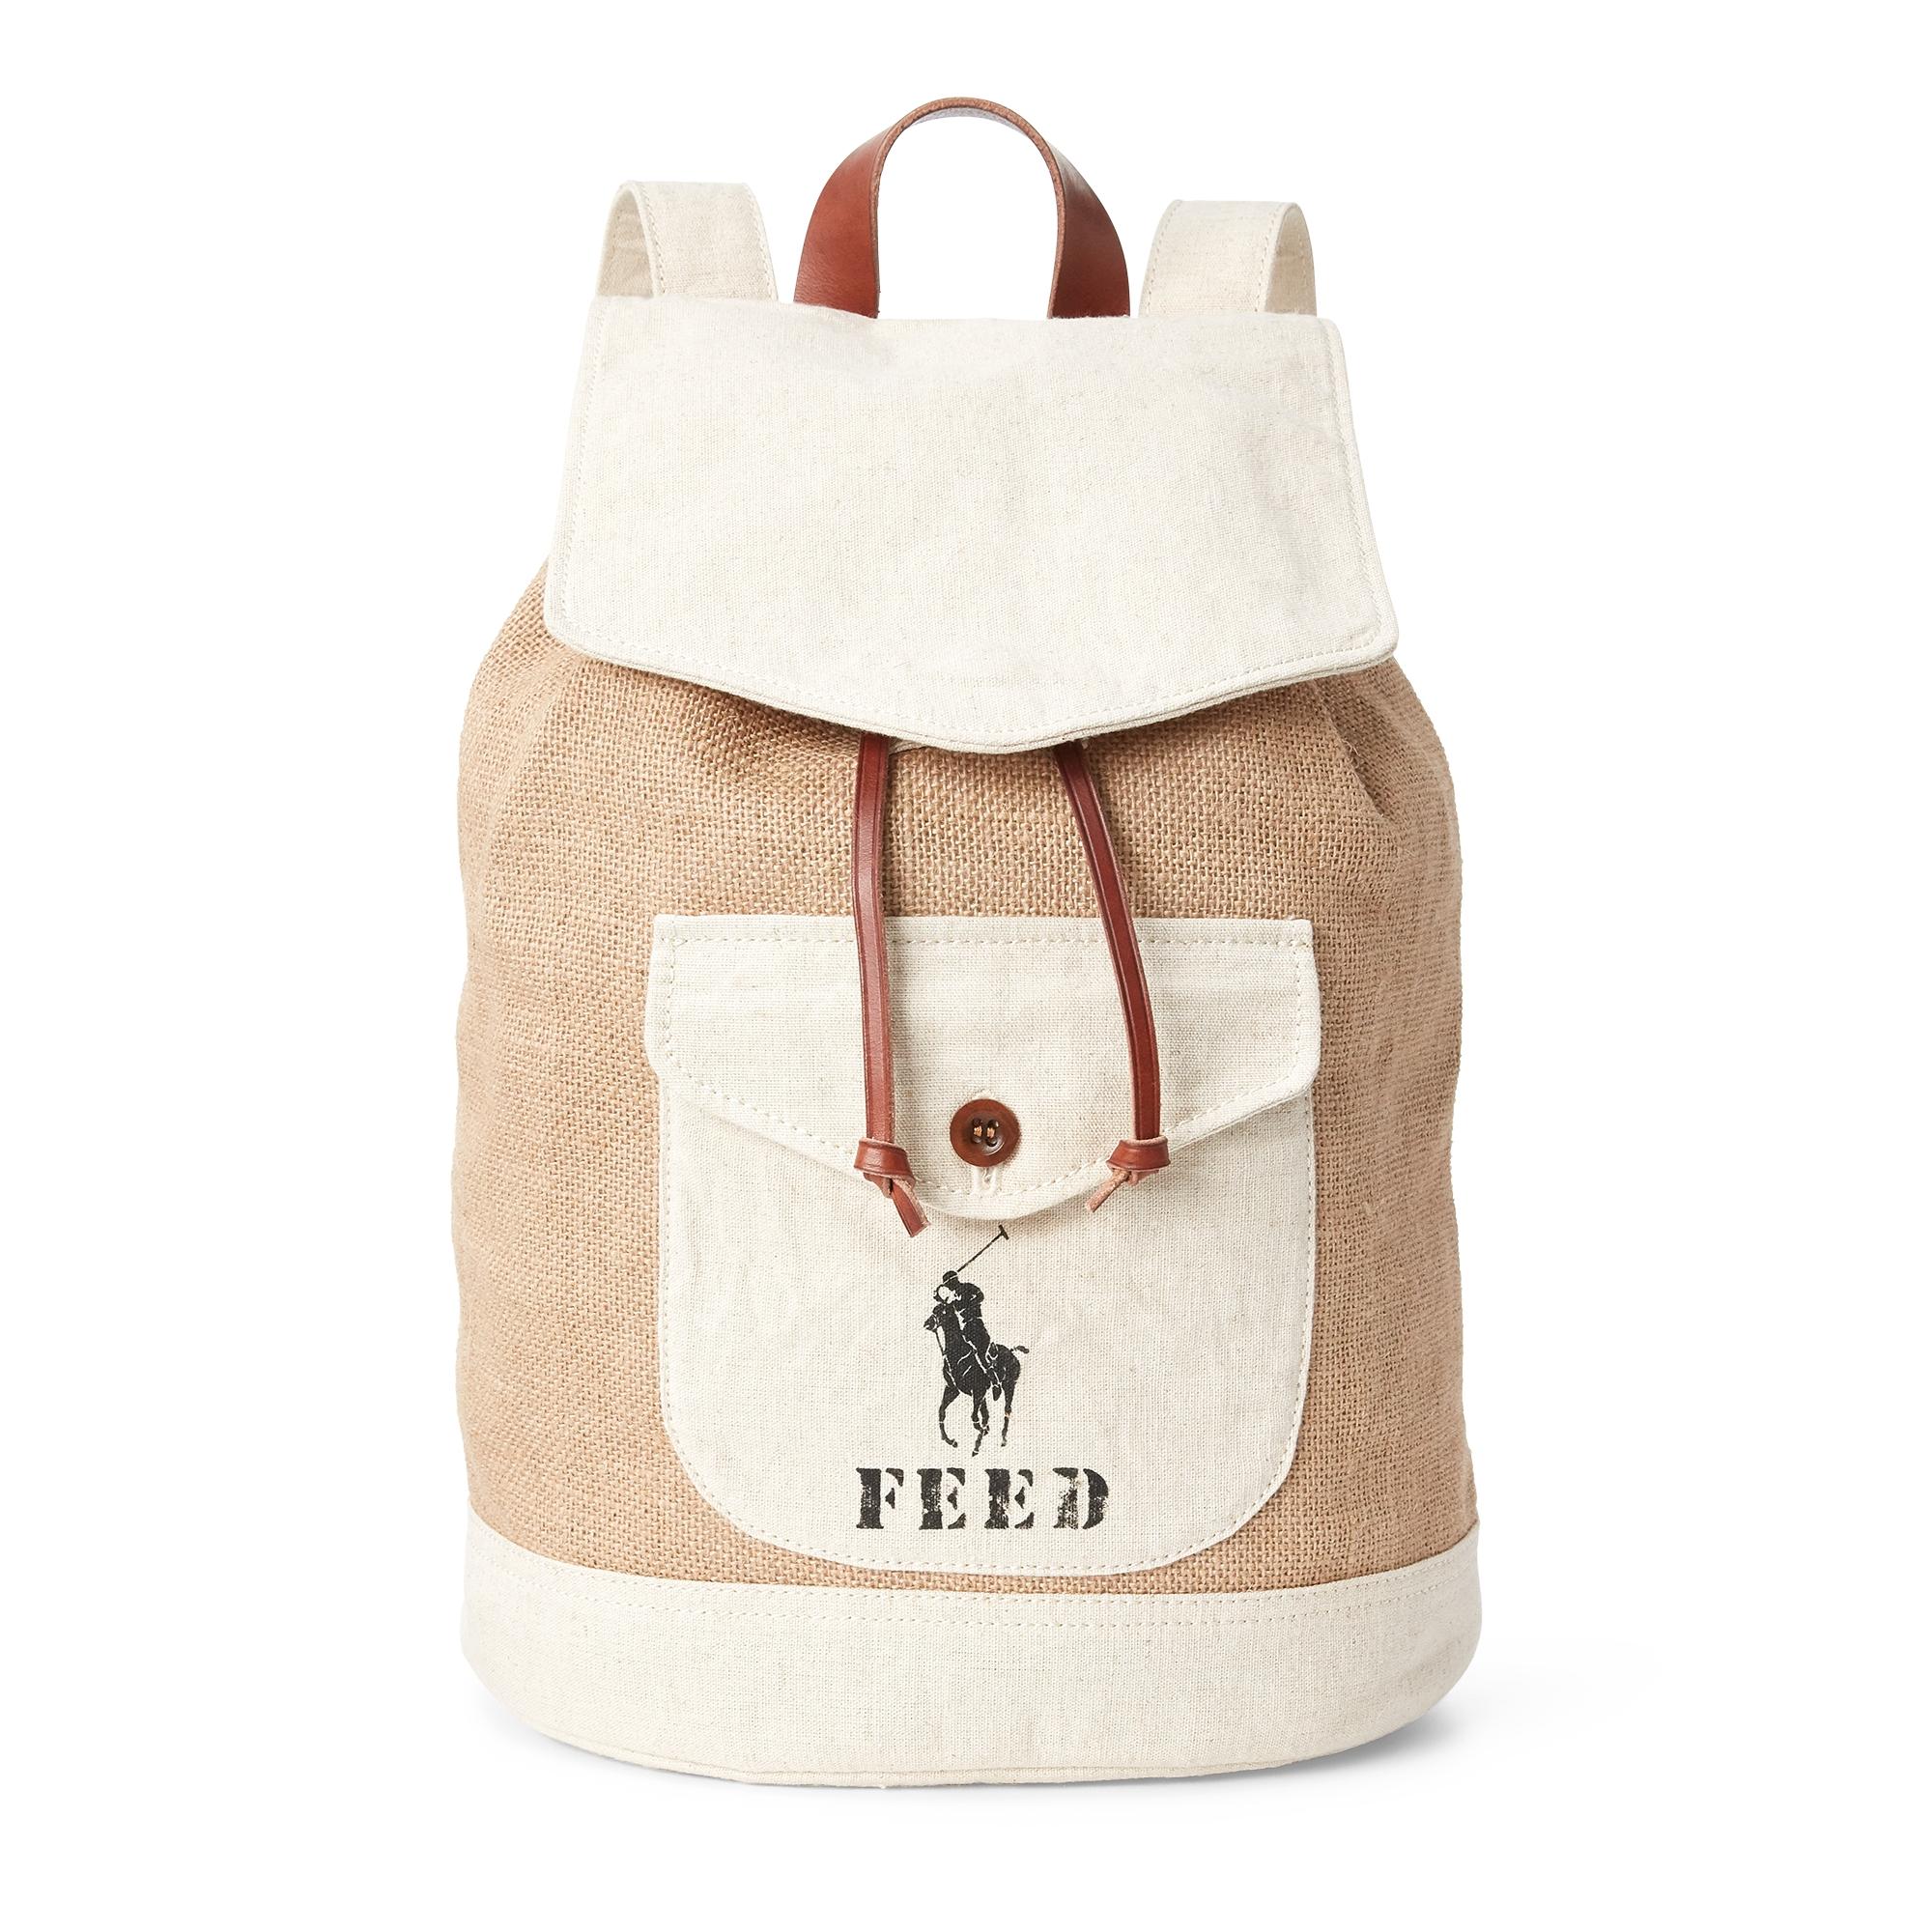 Ralph Lauren Polo X Feed Backpack in Natural for Men - Lyst